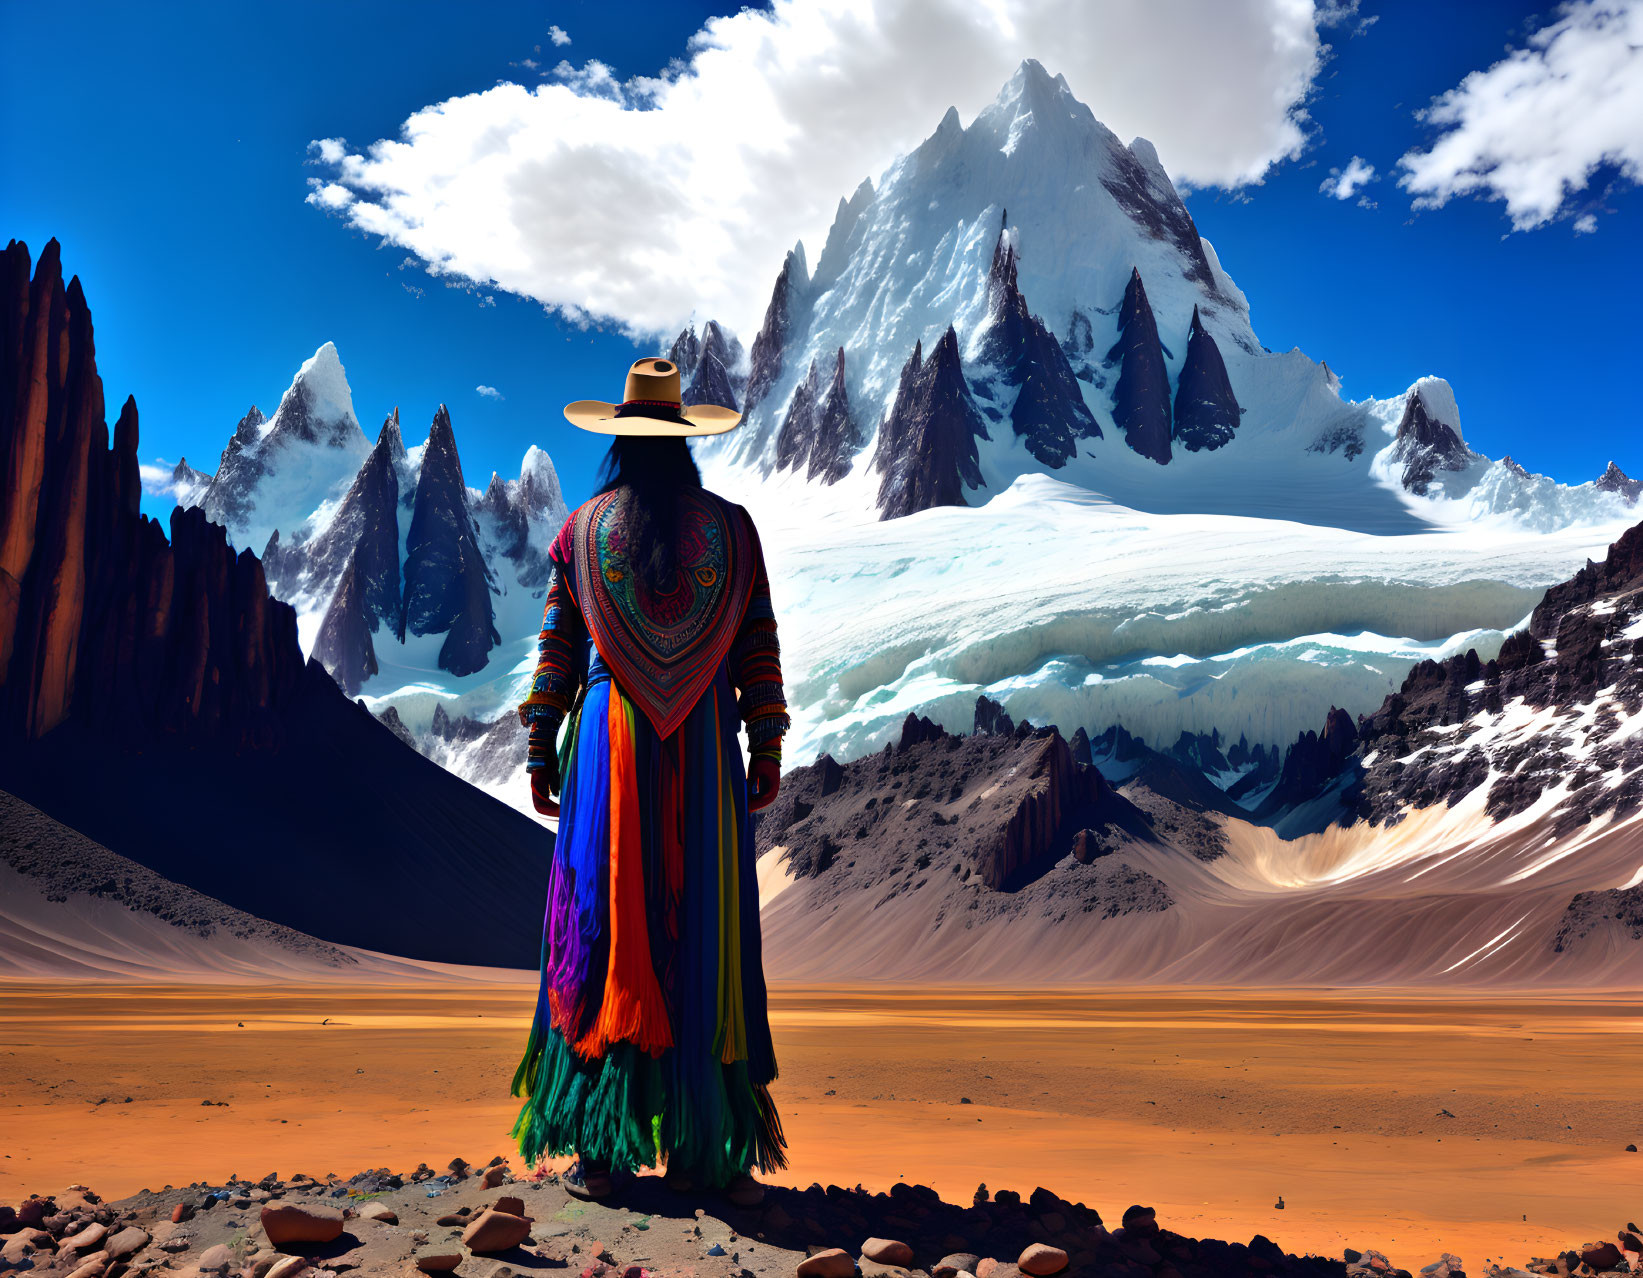 Colorfully dressed person in desert with rock formations and snow-capped mountain under blue sky